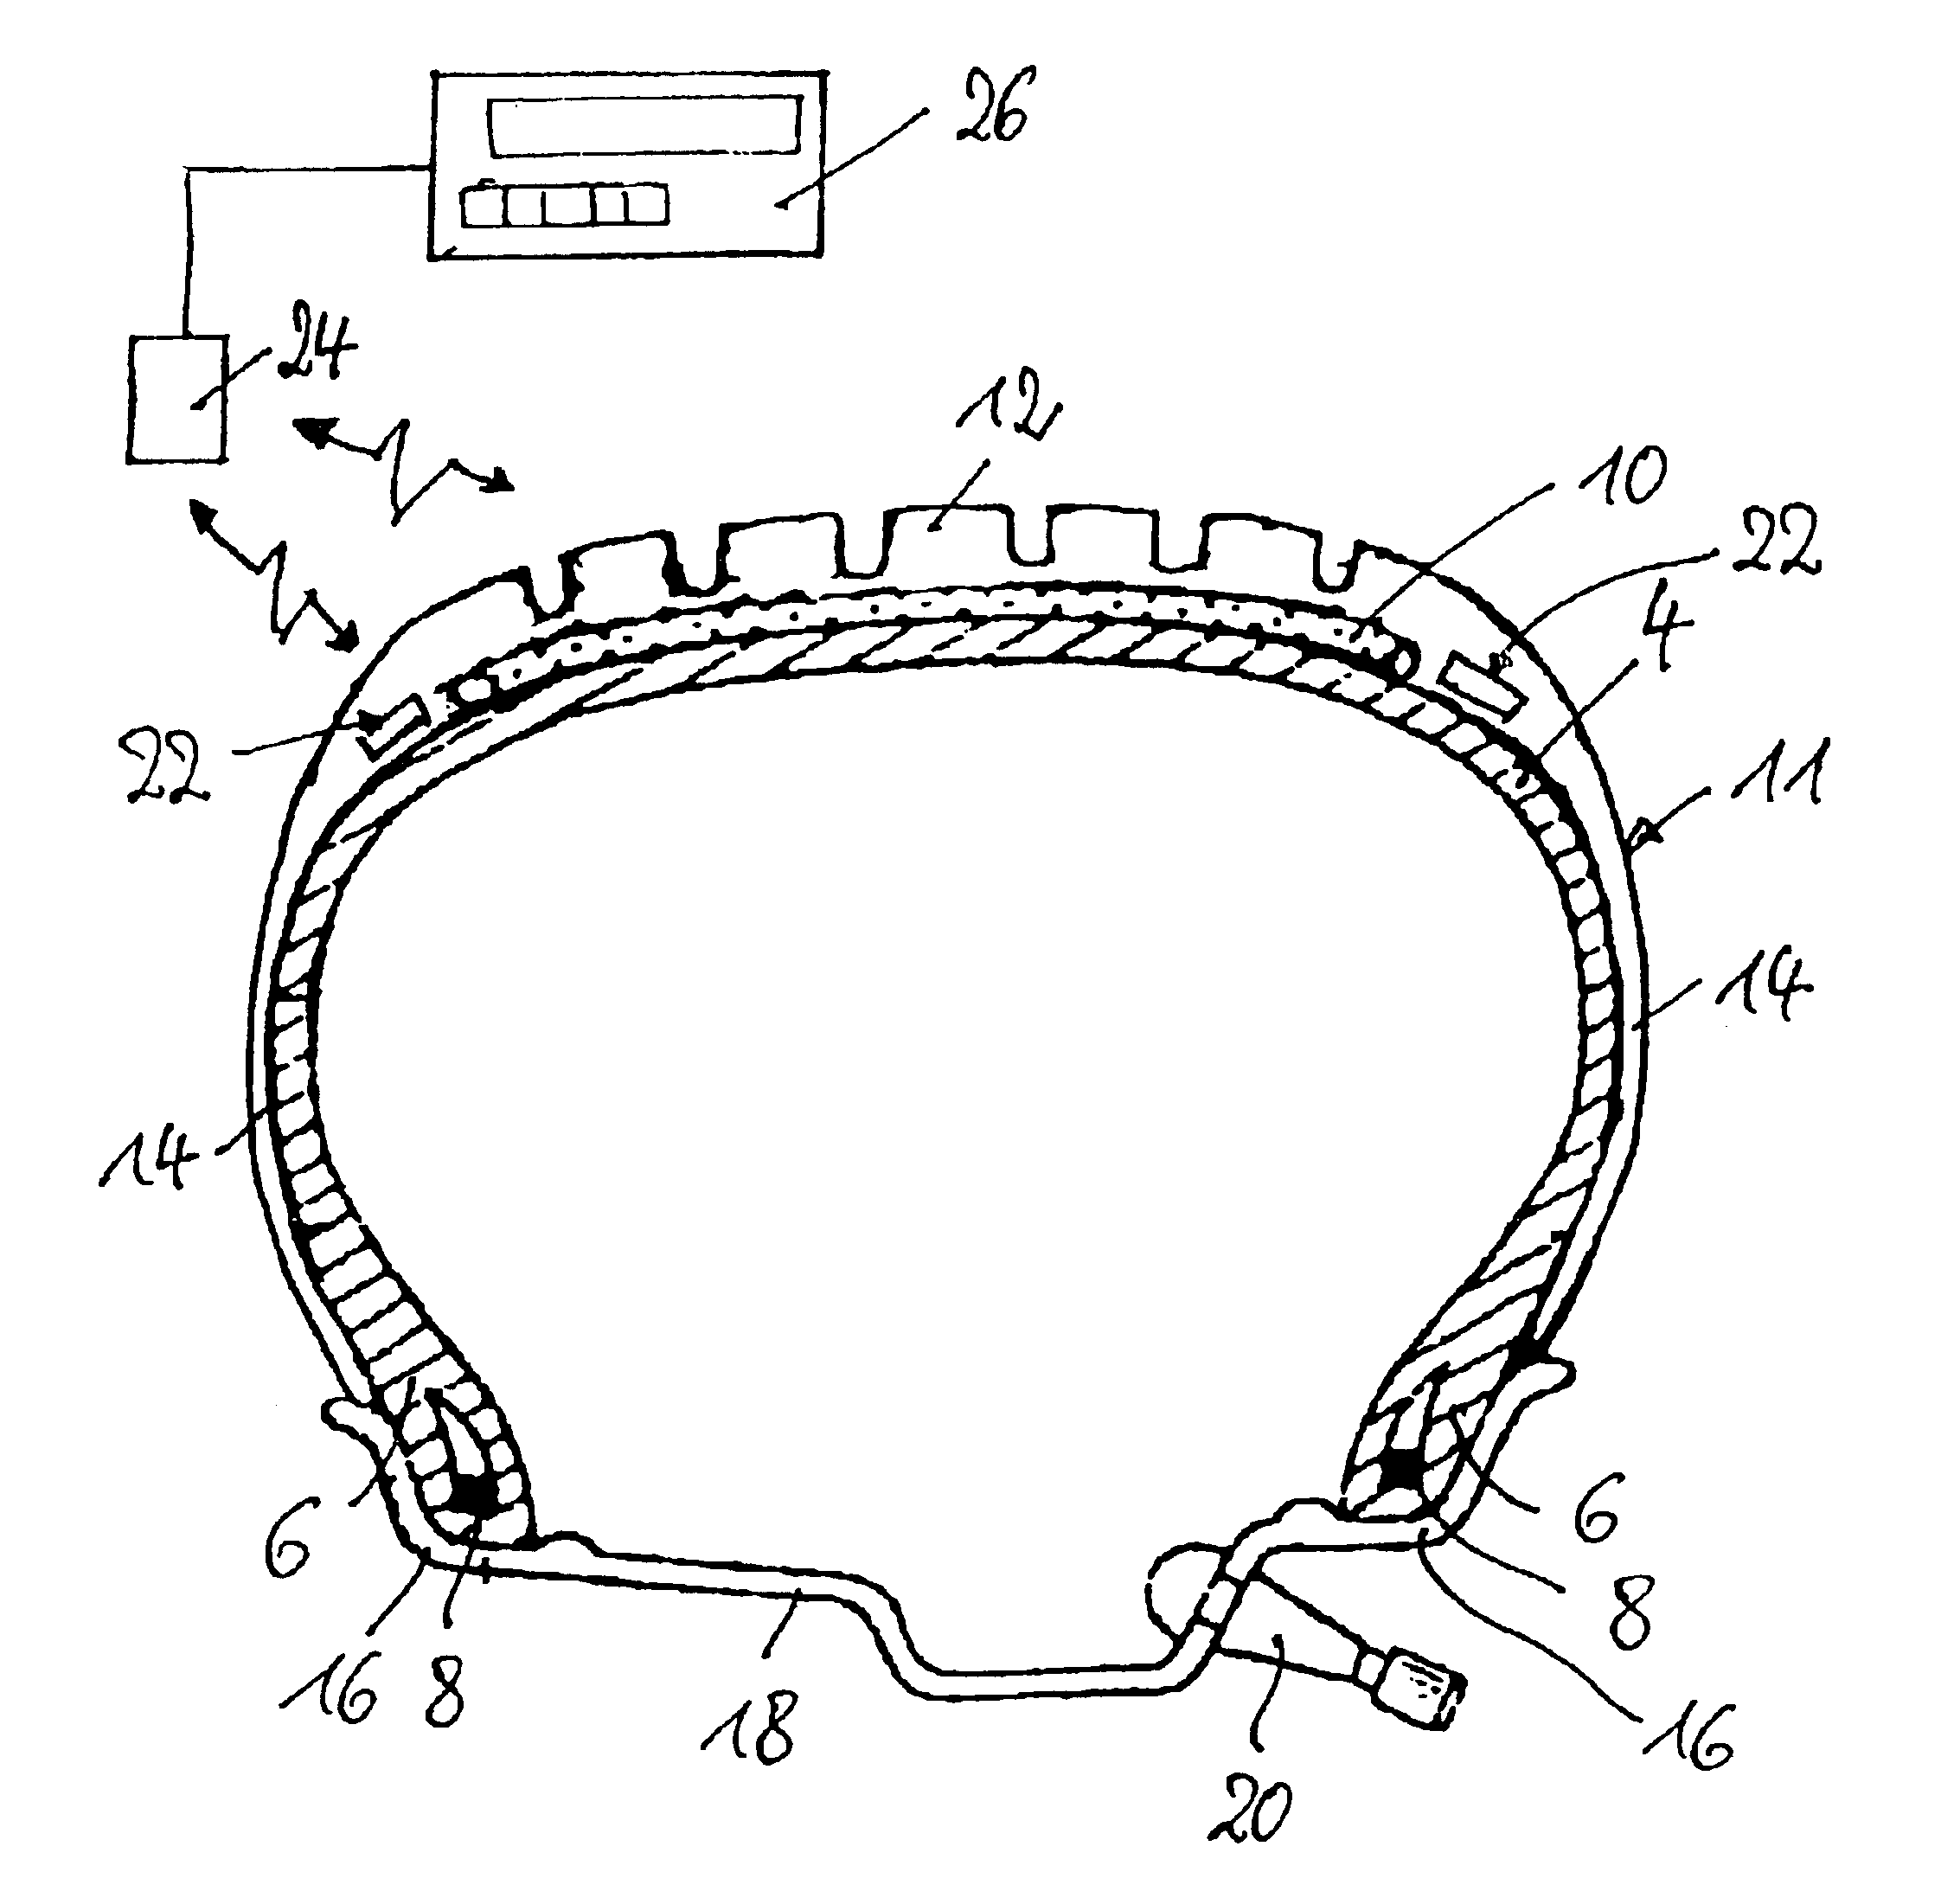 Method and system for measuring temperature and monitoring vehicle tire operation, and vehicle tire and method for introducing a temperature sensor into a vehicle tire